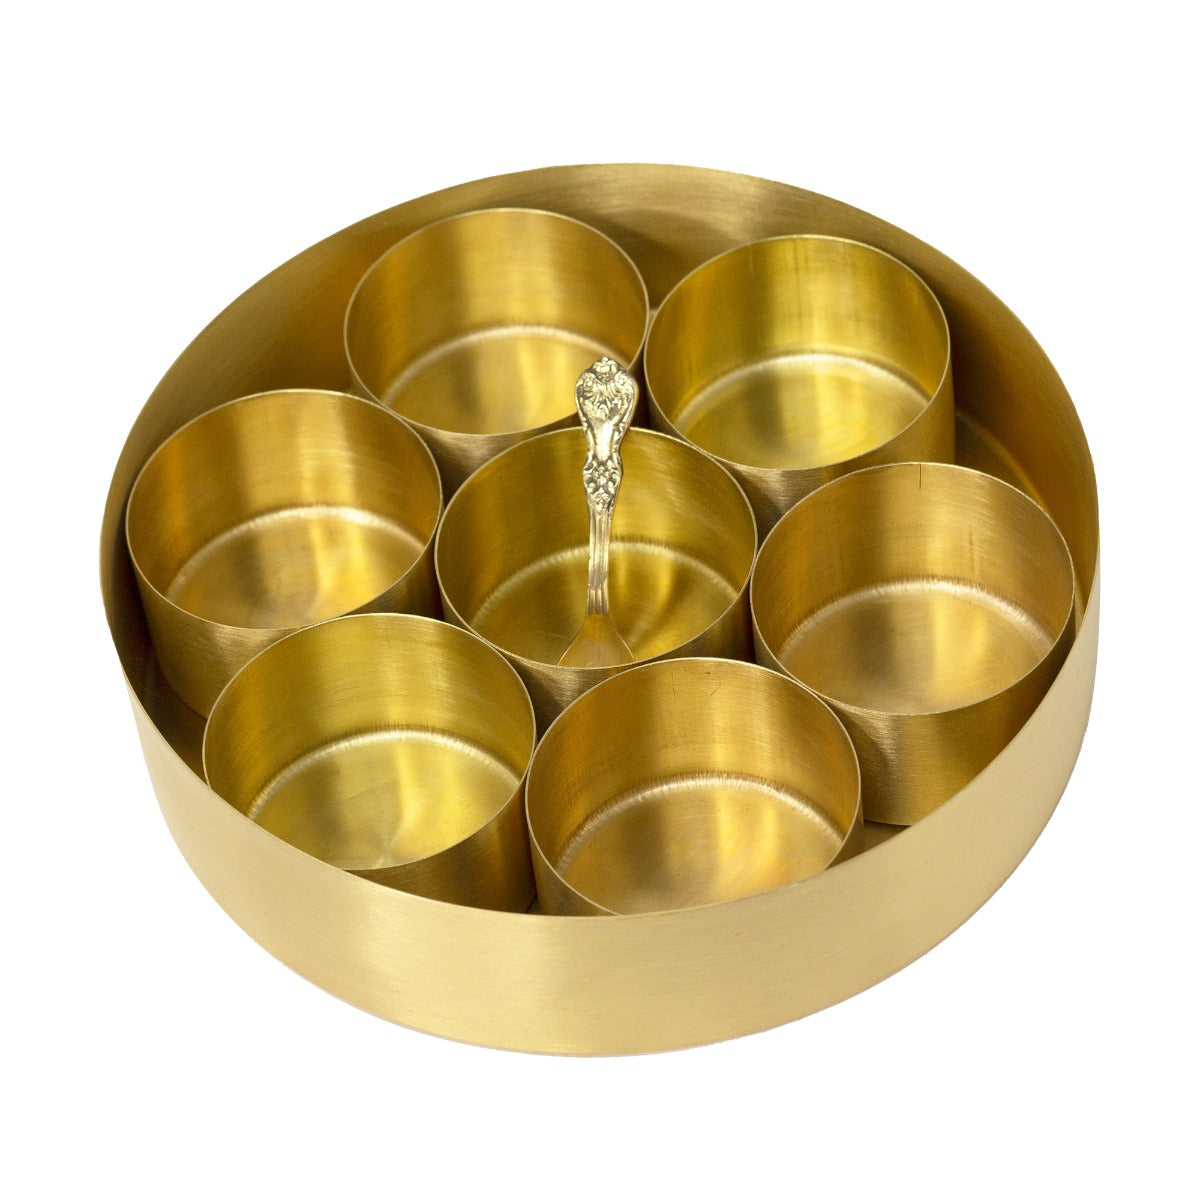 ROCK TAWA BRASS MASALA CONTAINER (INNER CUP 7NOS WITH 1SPOON)